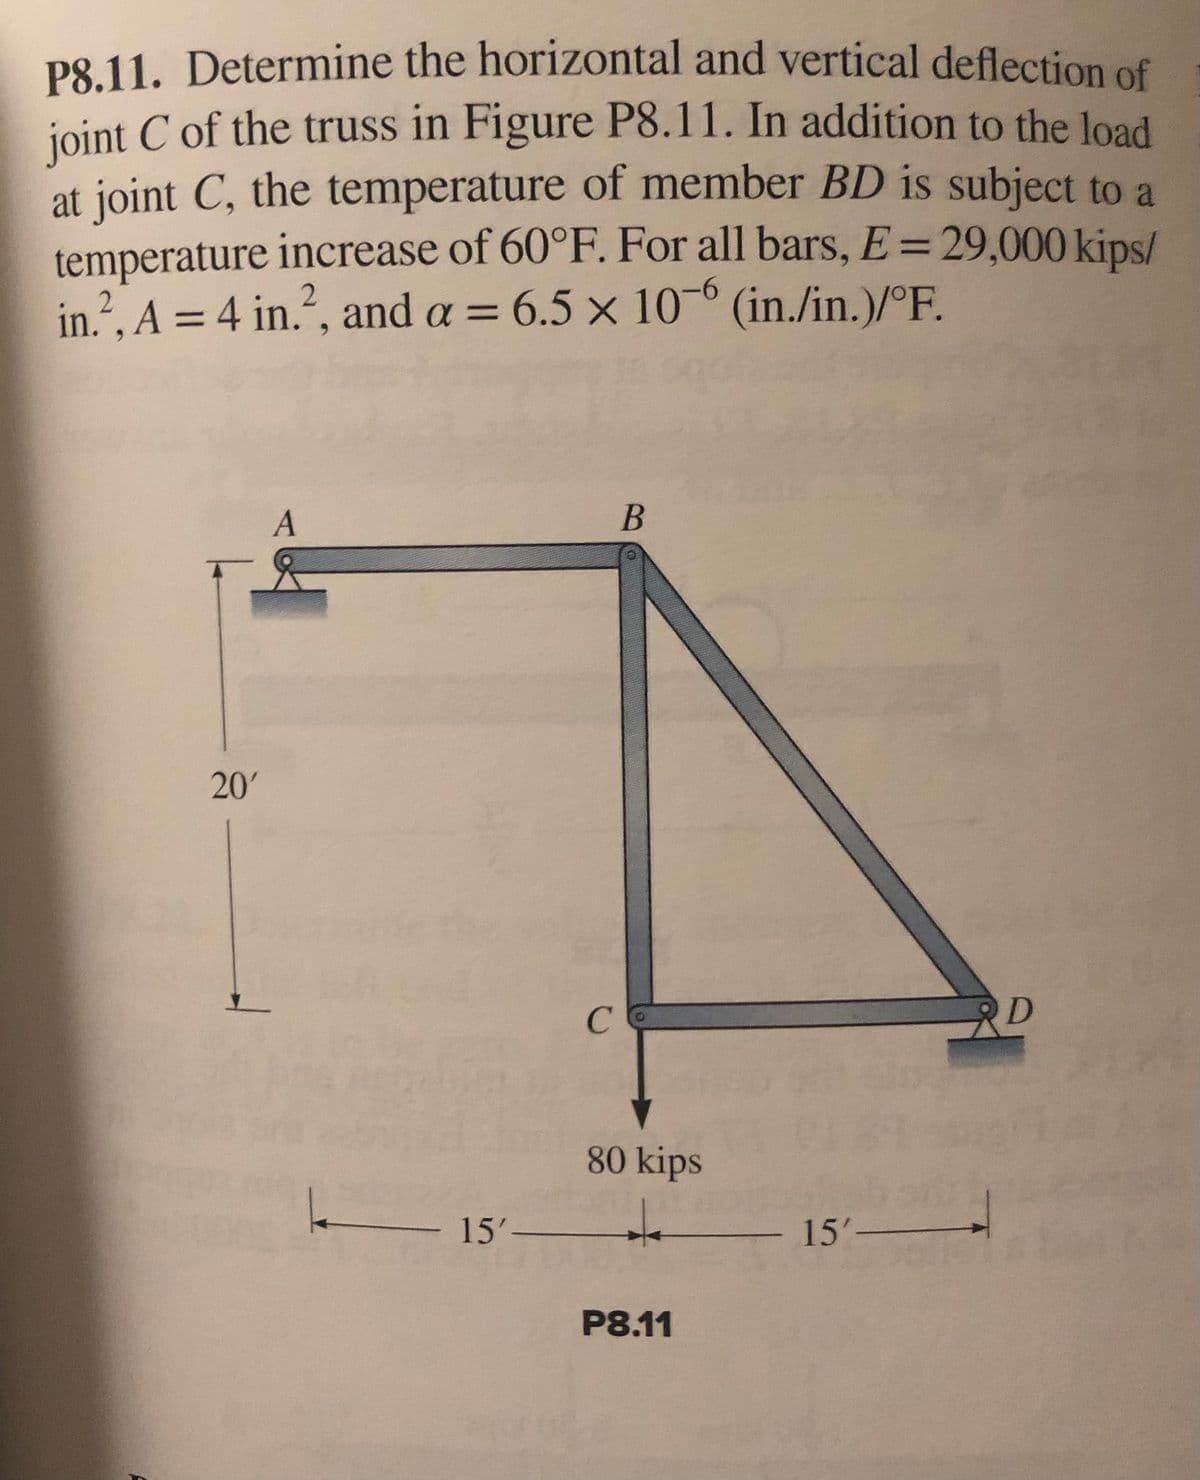 P8.11. Determine the horizontal and vertical deflection of
joint C of the truss in Figure P8.11. In addition to the load
at joint C, the temperature of member BD is subject to a
temperature increase of 60°F. For all bars, E = 29,000 kips/
in.², A = 4 in.², and a = 6.5 x 10-6 (in./in.)/°F.
A
B
D
L
20'
——— 15'-
-
с
80 kips
+
P8.11
- 15'-